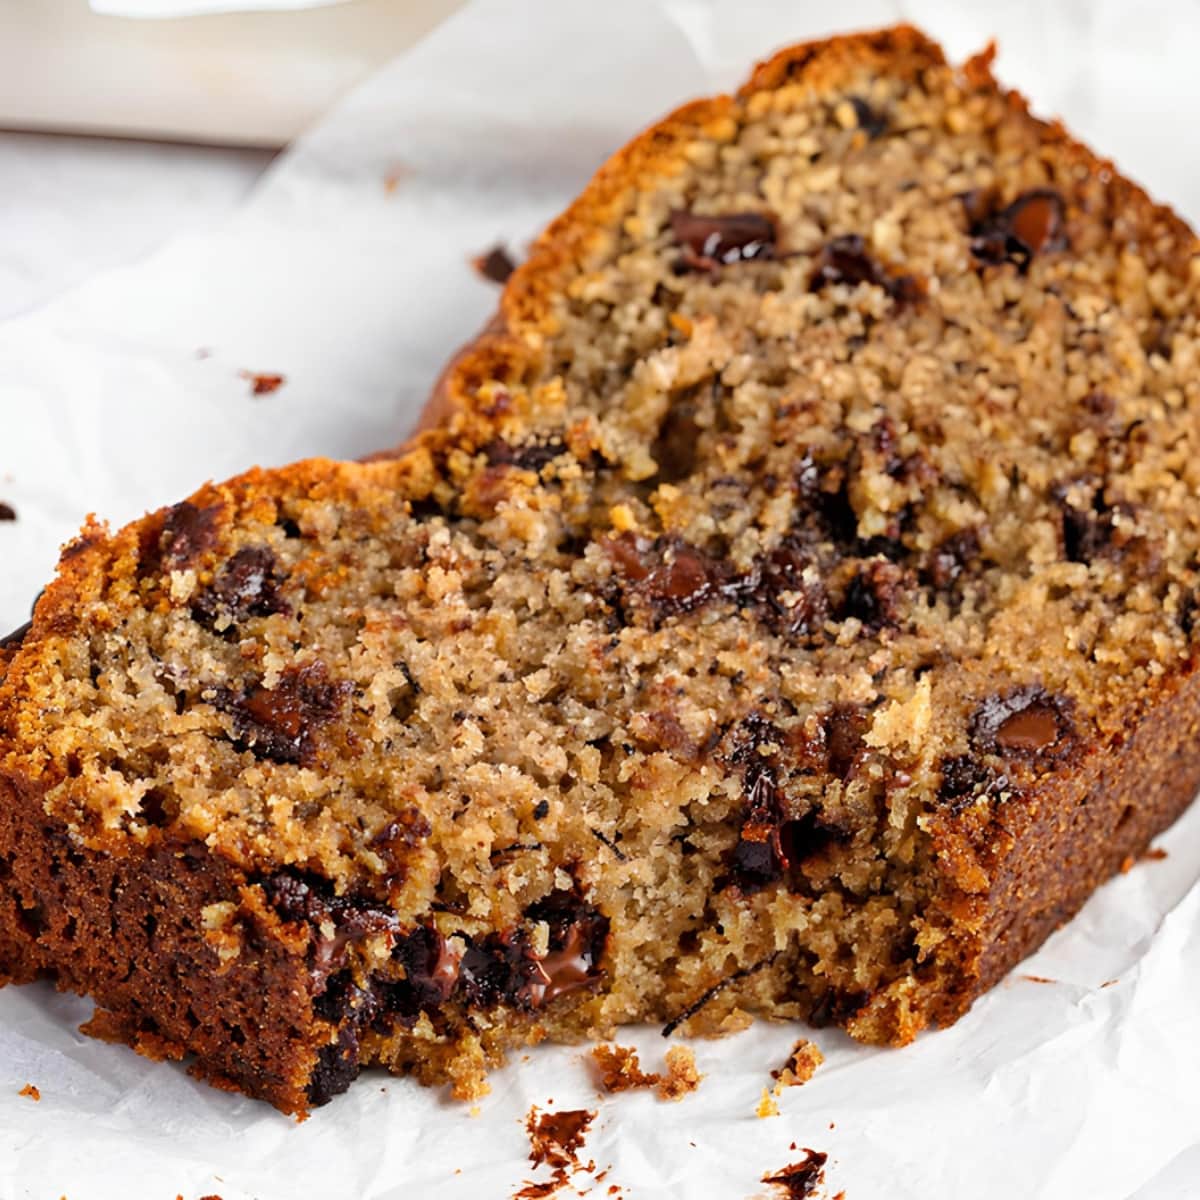 Chocolate chip banana bread on a piece of parchment paper